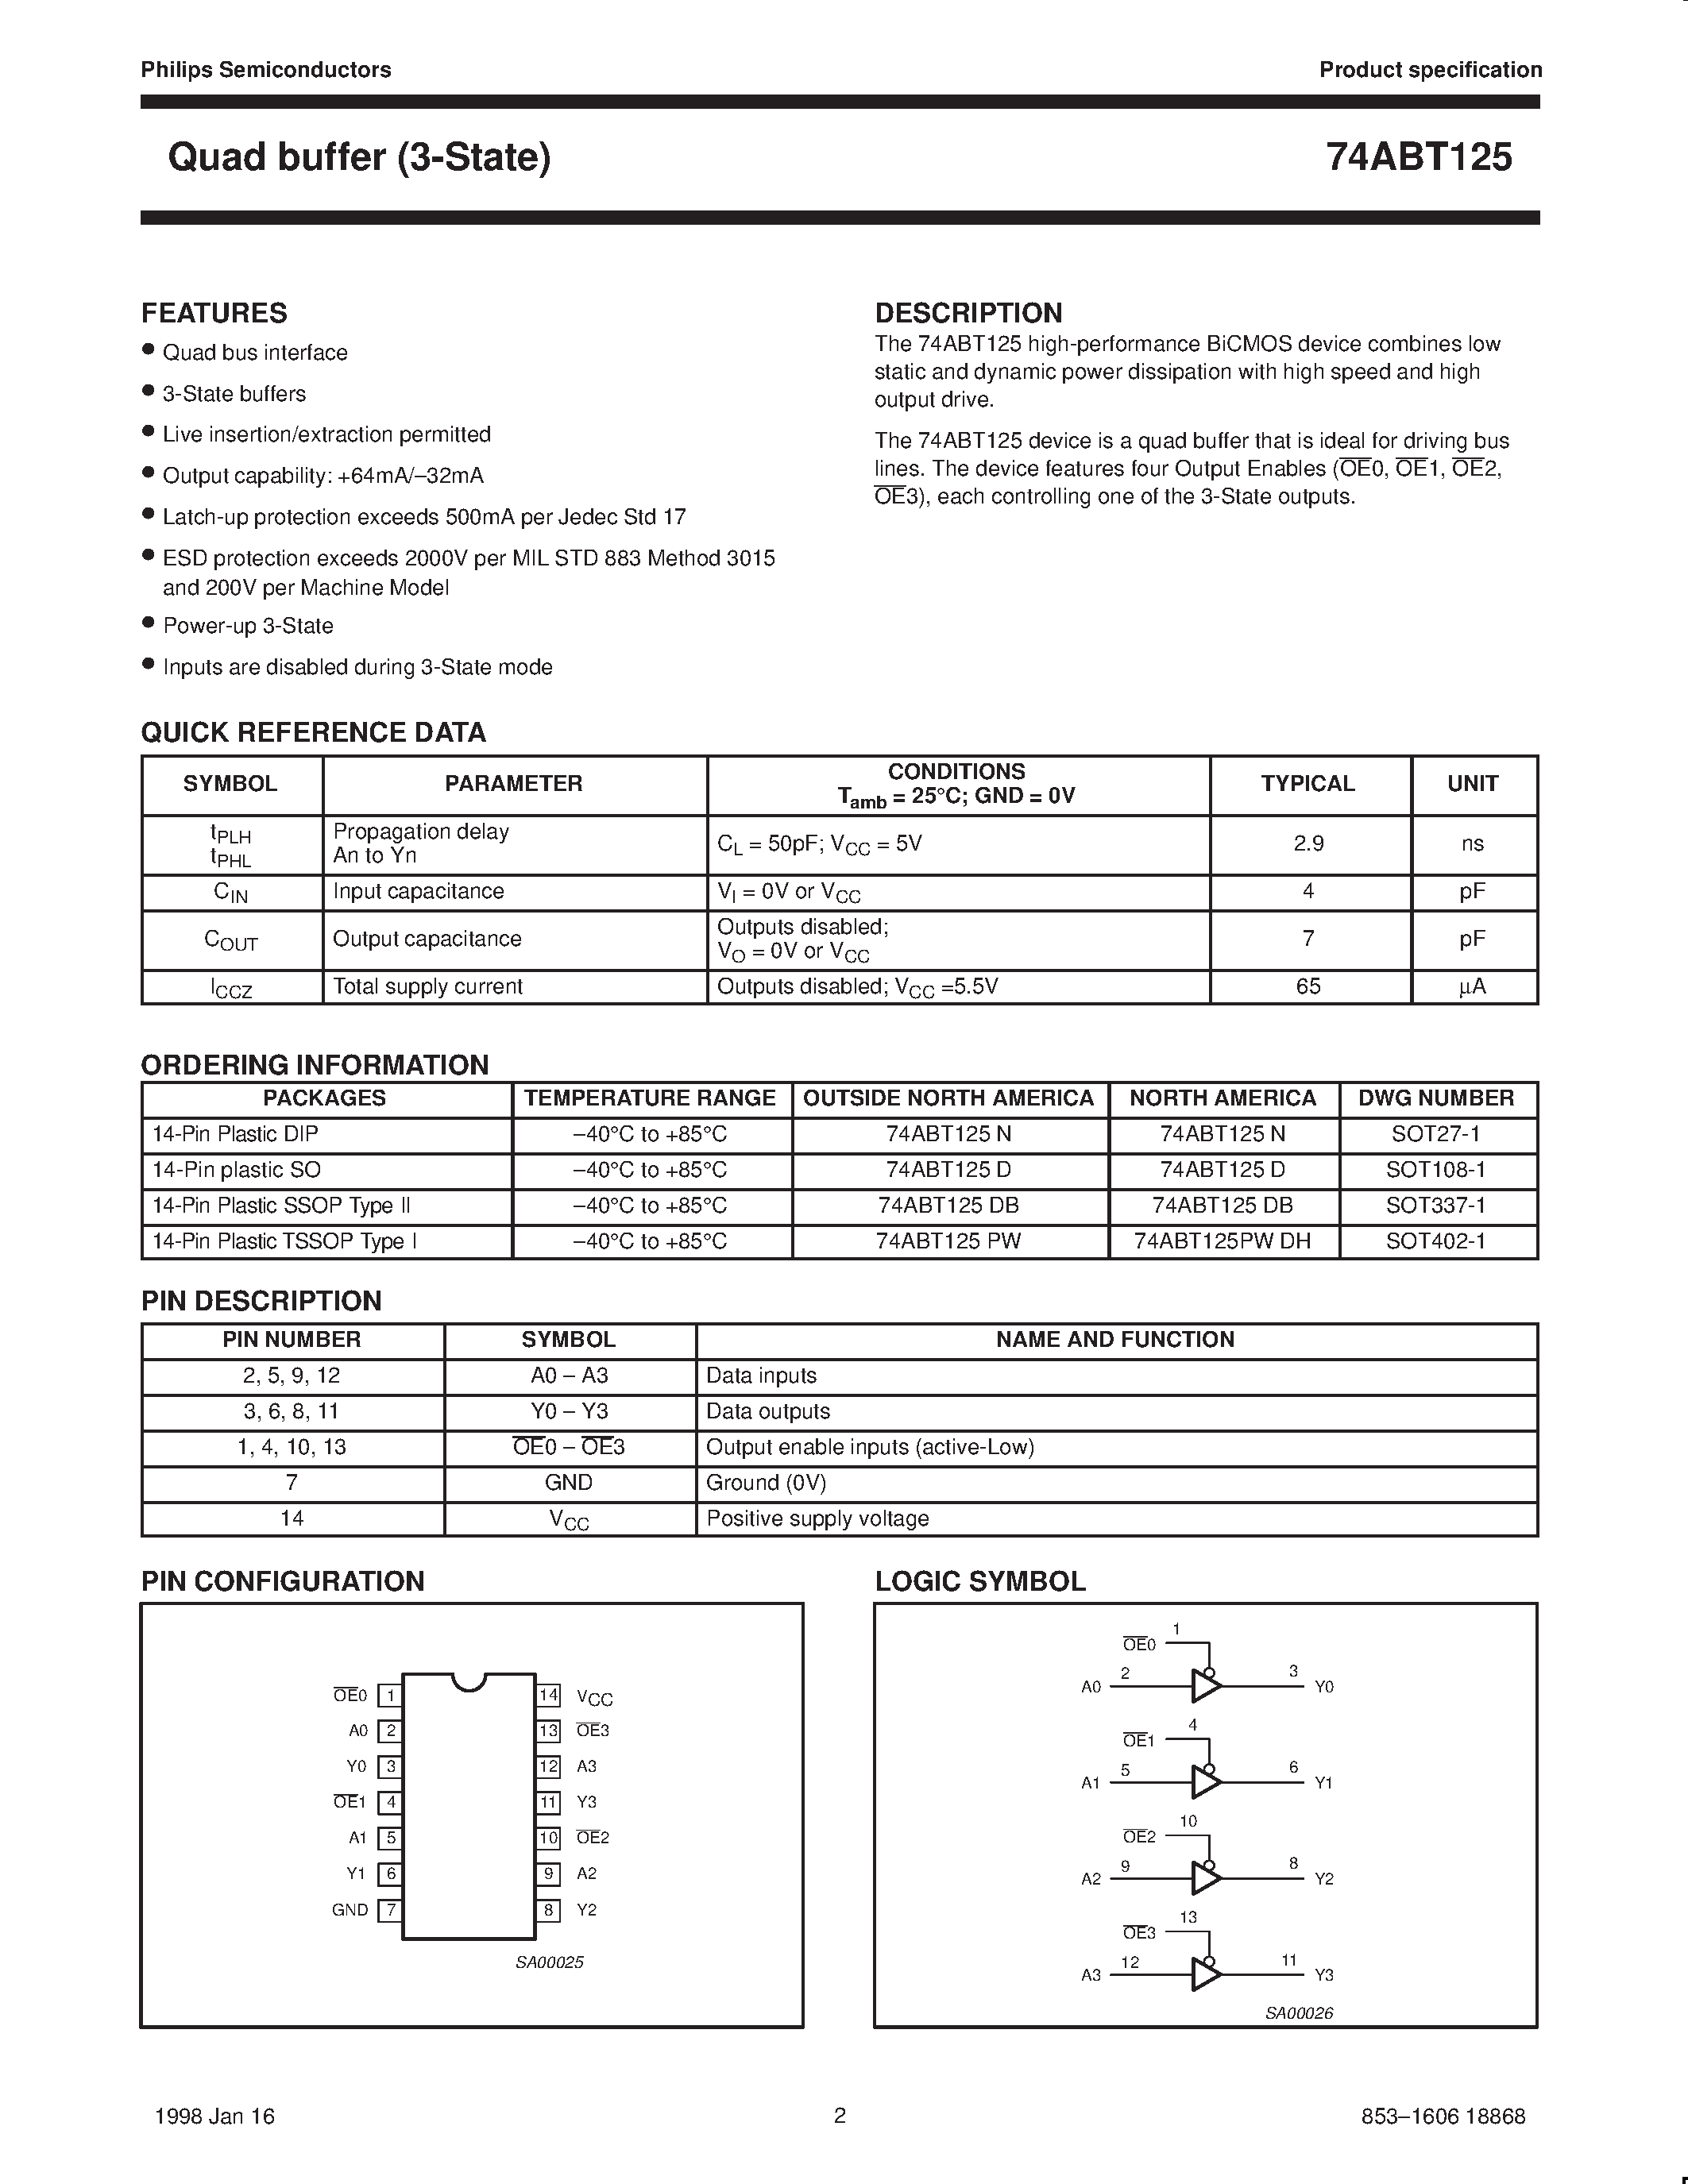 Datasheet 74ABT125D - Quad buffer 3-State page 2